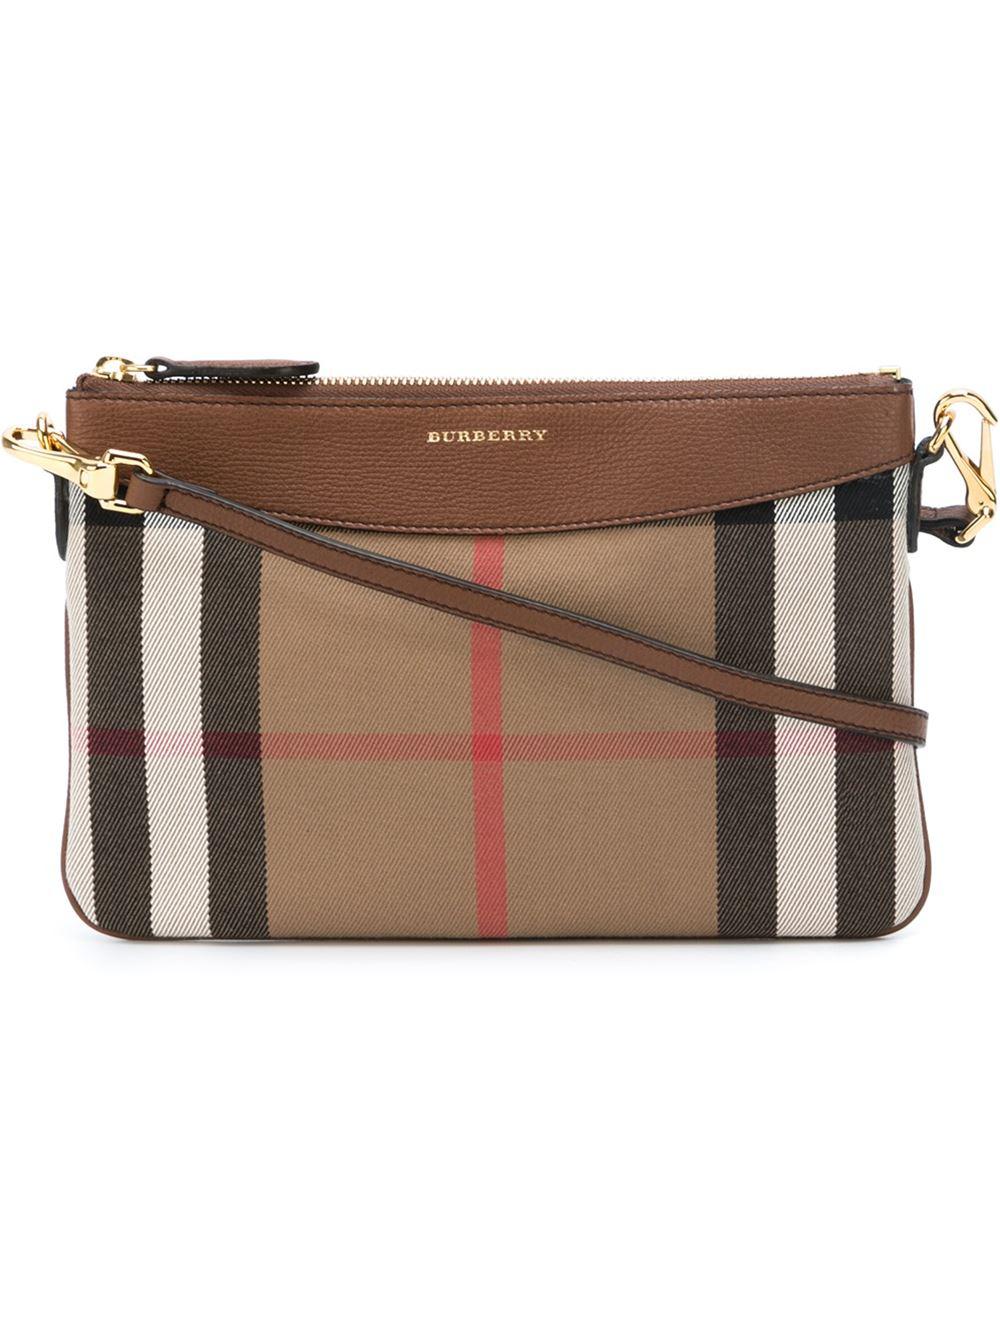 Burberry Peyton Leather Check Crossbody Bag in Brown | Lyst